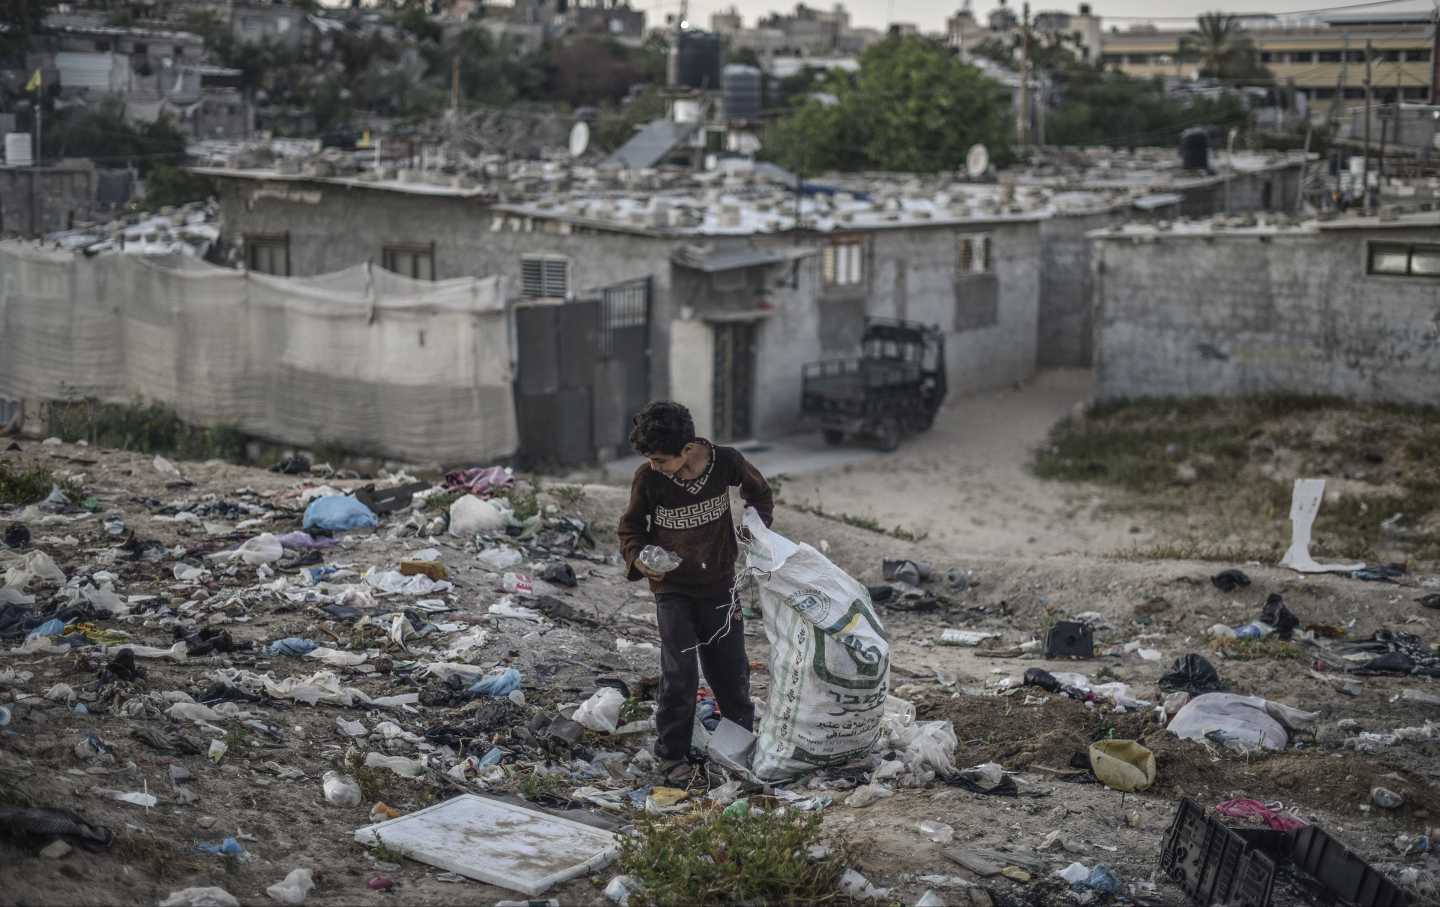 A 12 year-old, Palestinian boy named Hasan Abu Emune collects recyclable material such as, paper, metal and glass to contribute his family's livelihood as the daily life continues under difficult conditions in Khan Yunis, Gaza on April 24, 2023.